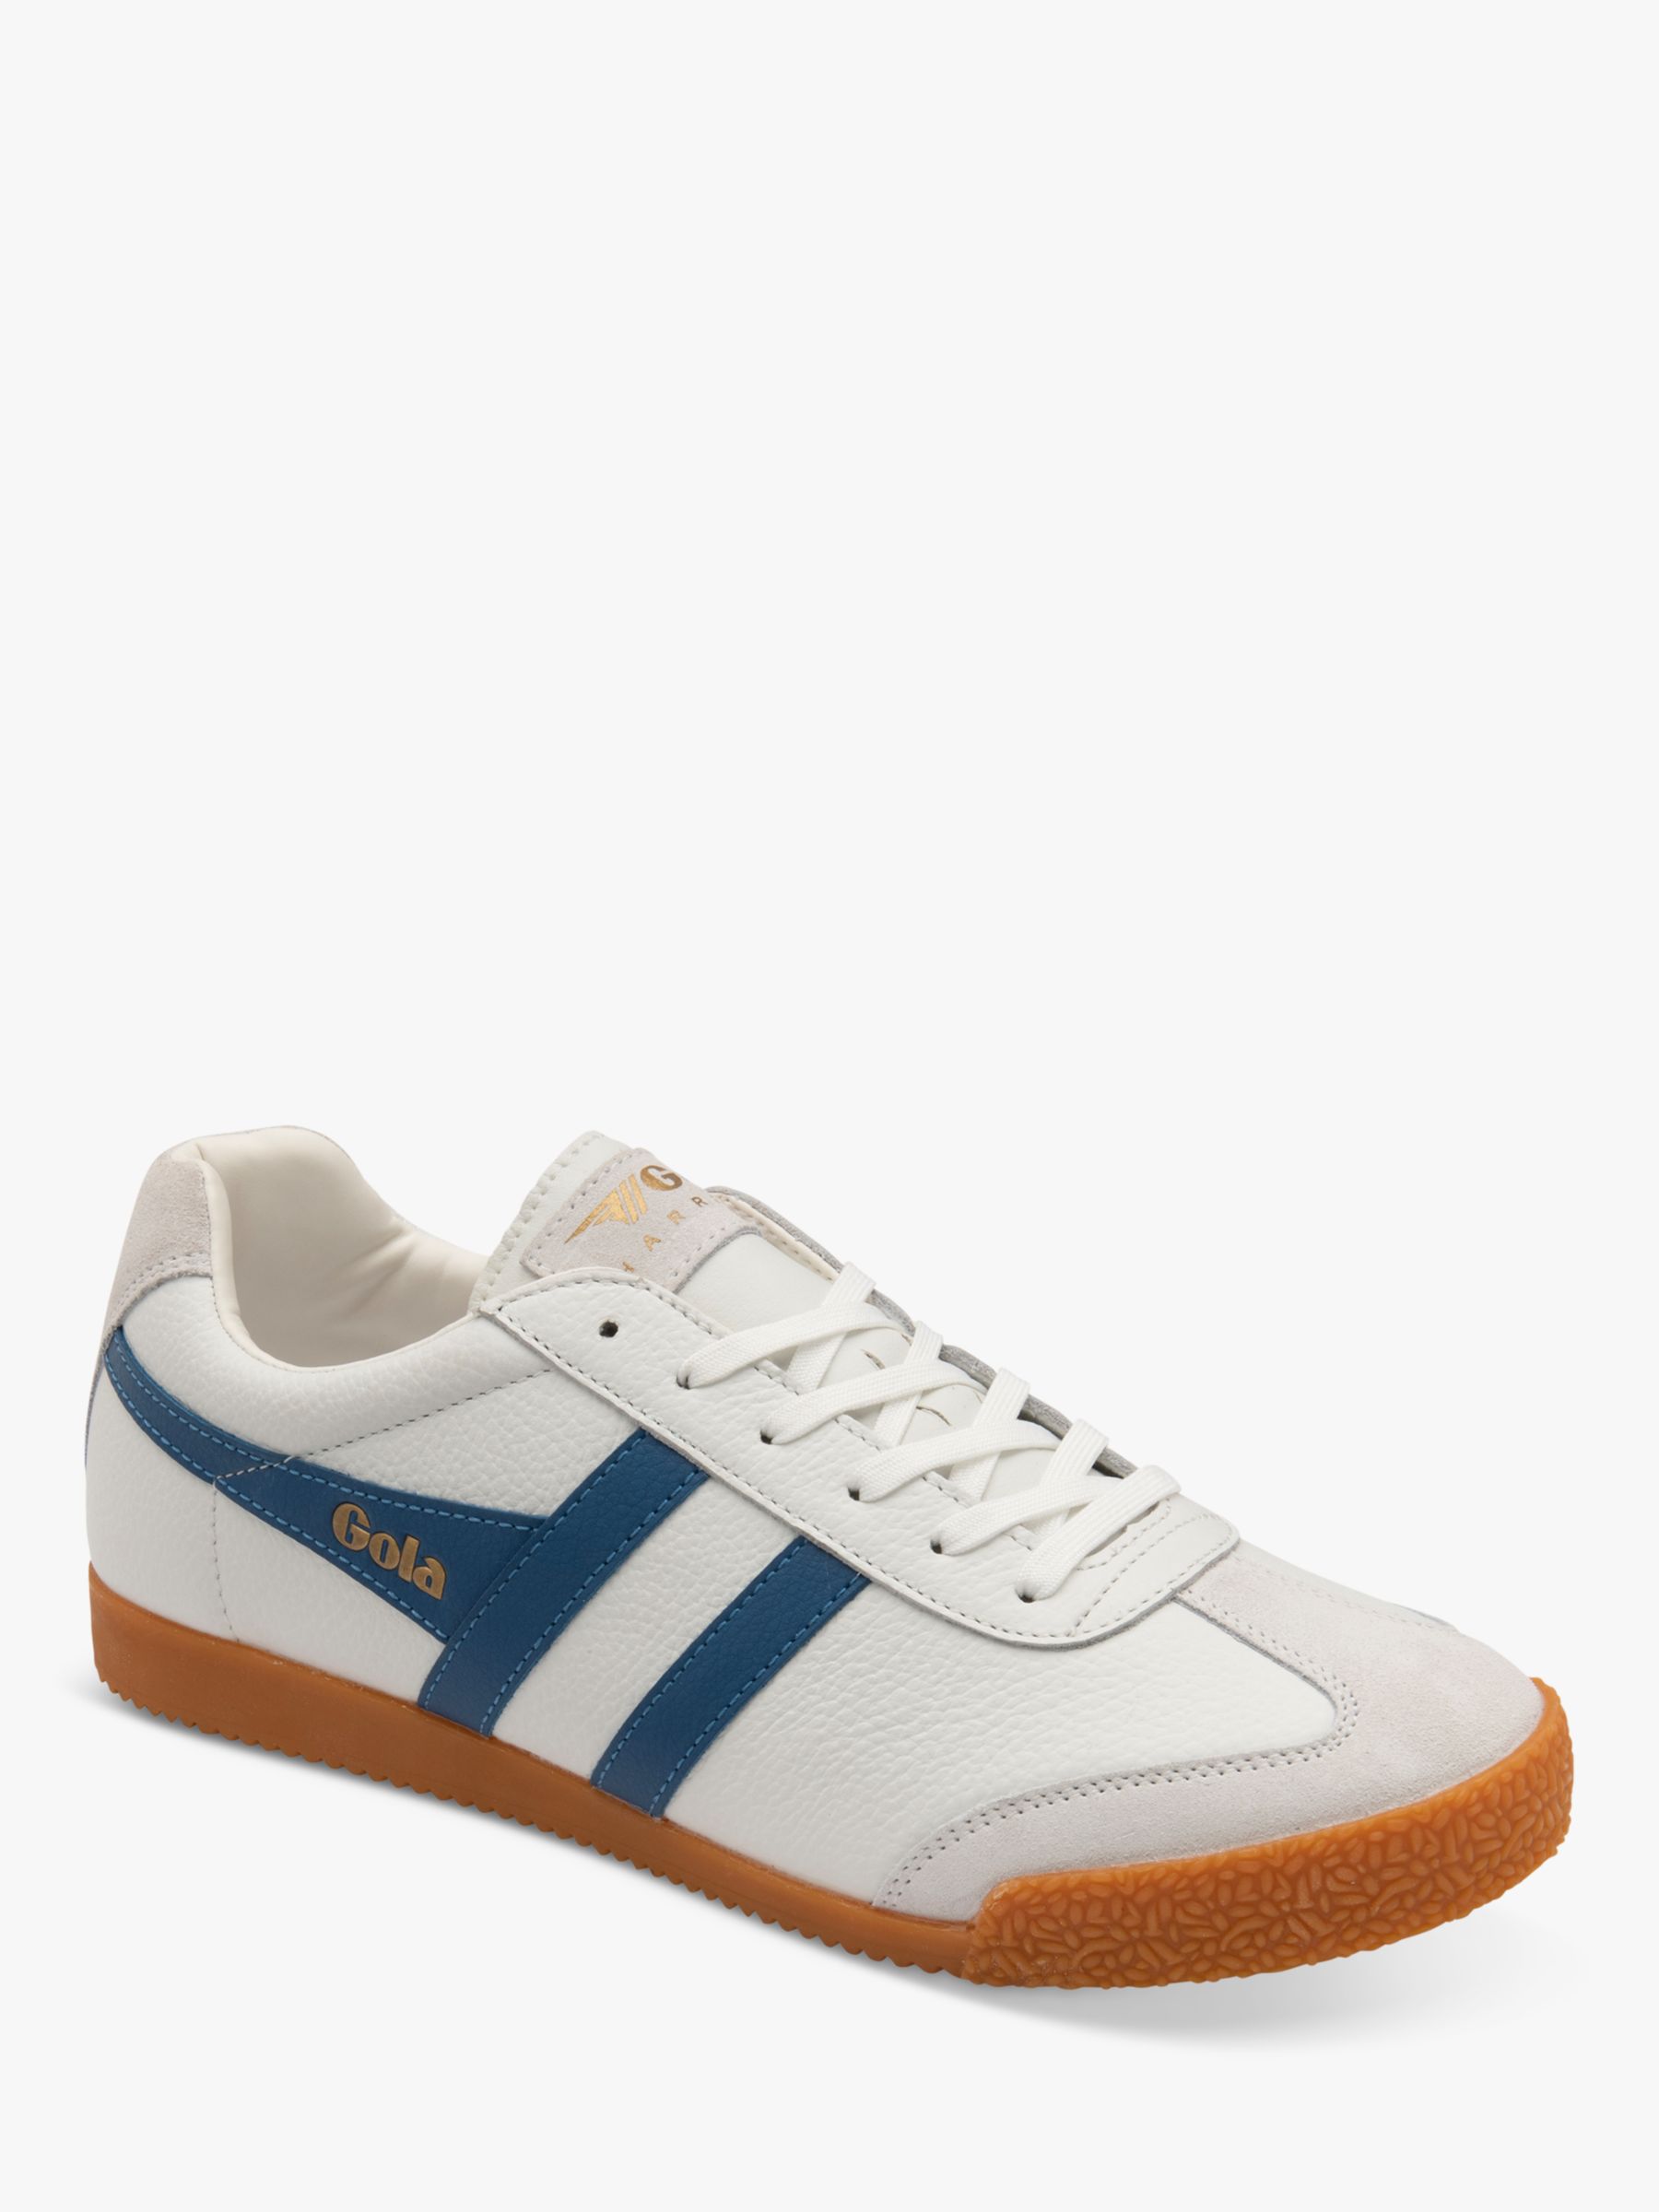 Gola Classics Harrier Leather Lace Up Trainers, White/Marine Blue, 6